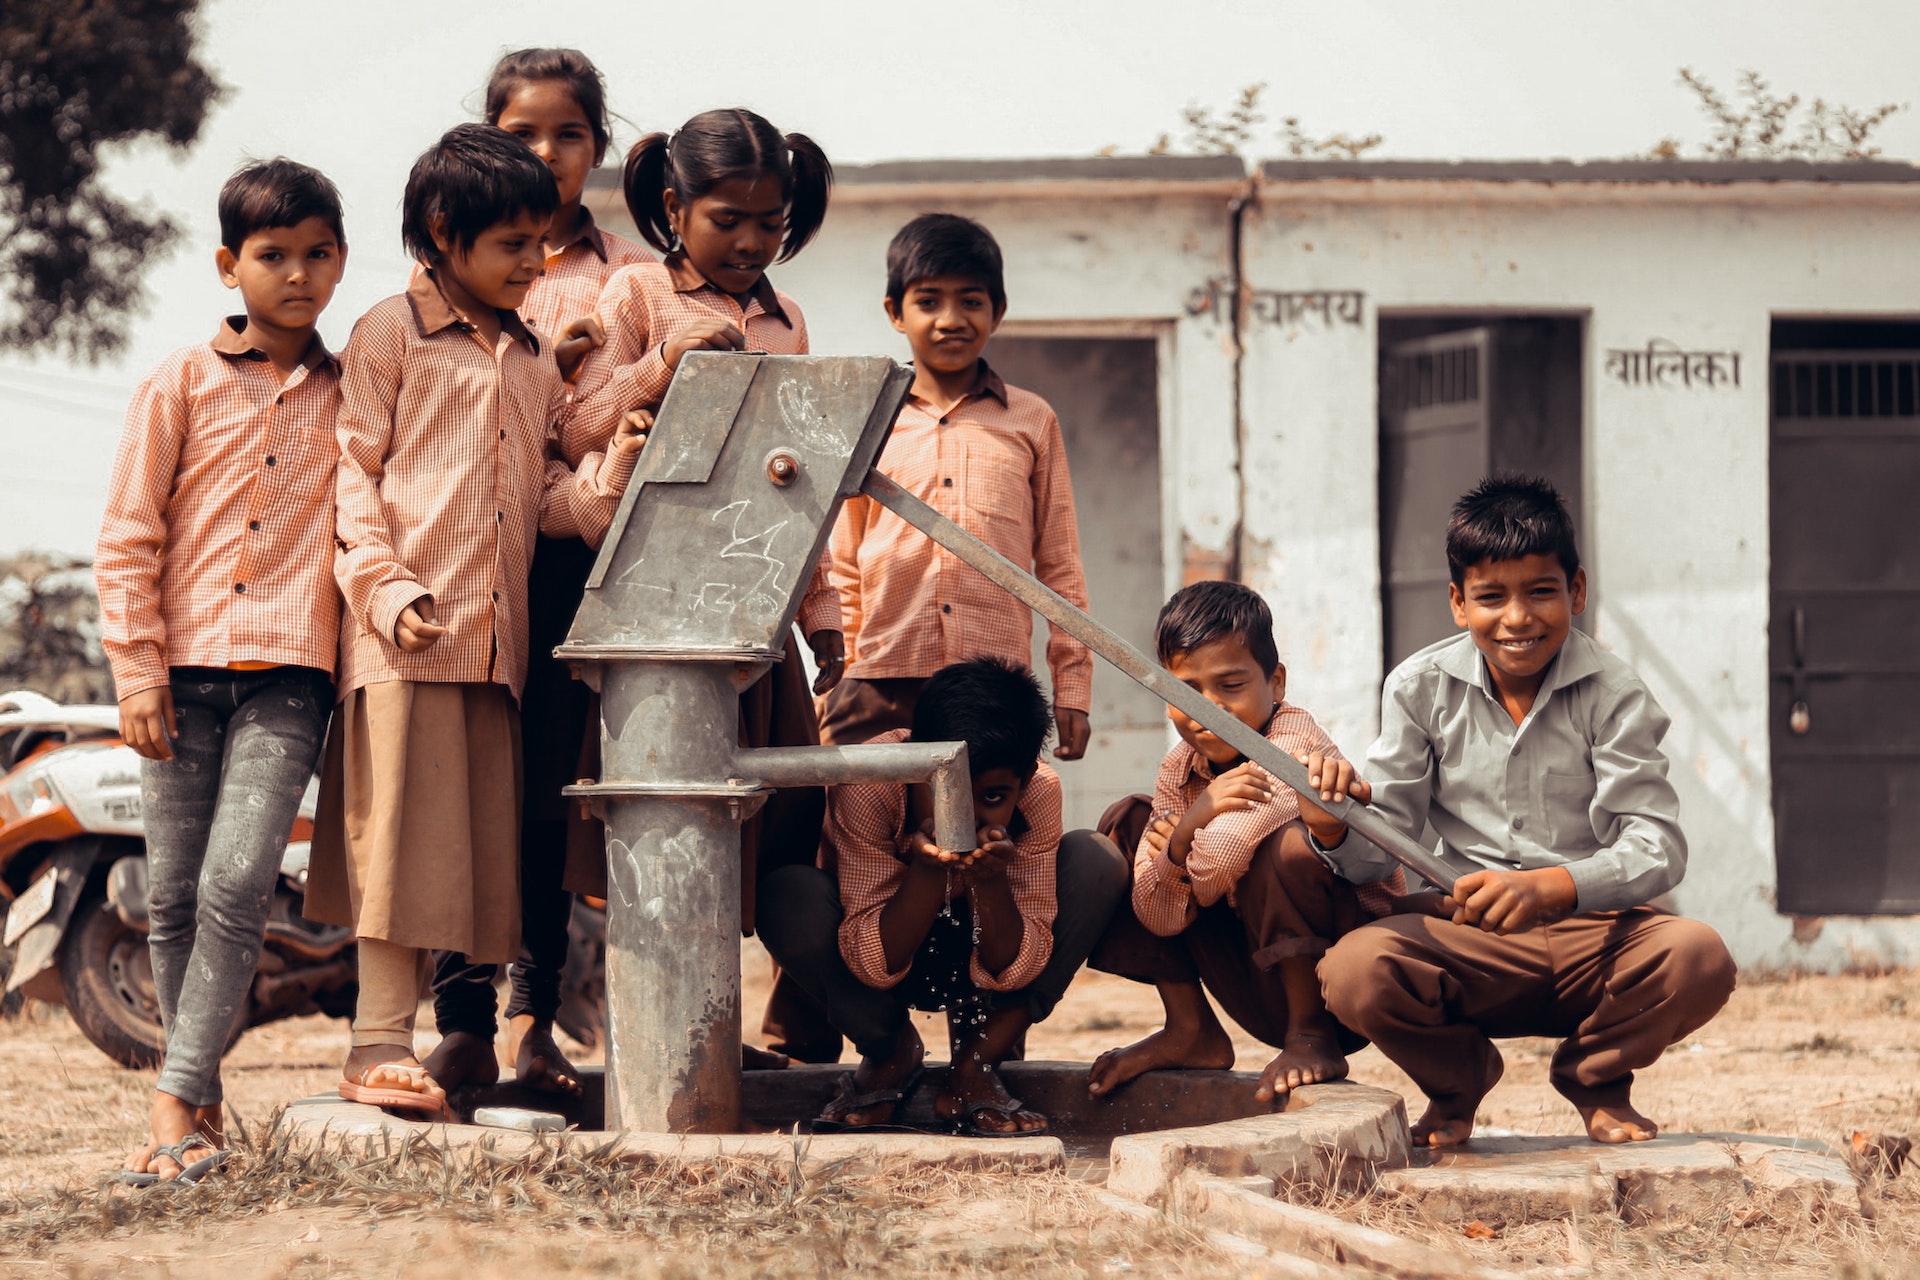 group of children in india playing near a water well